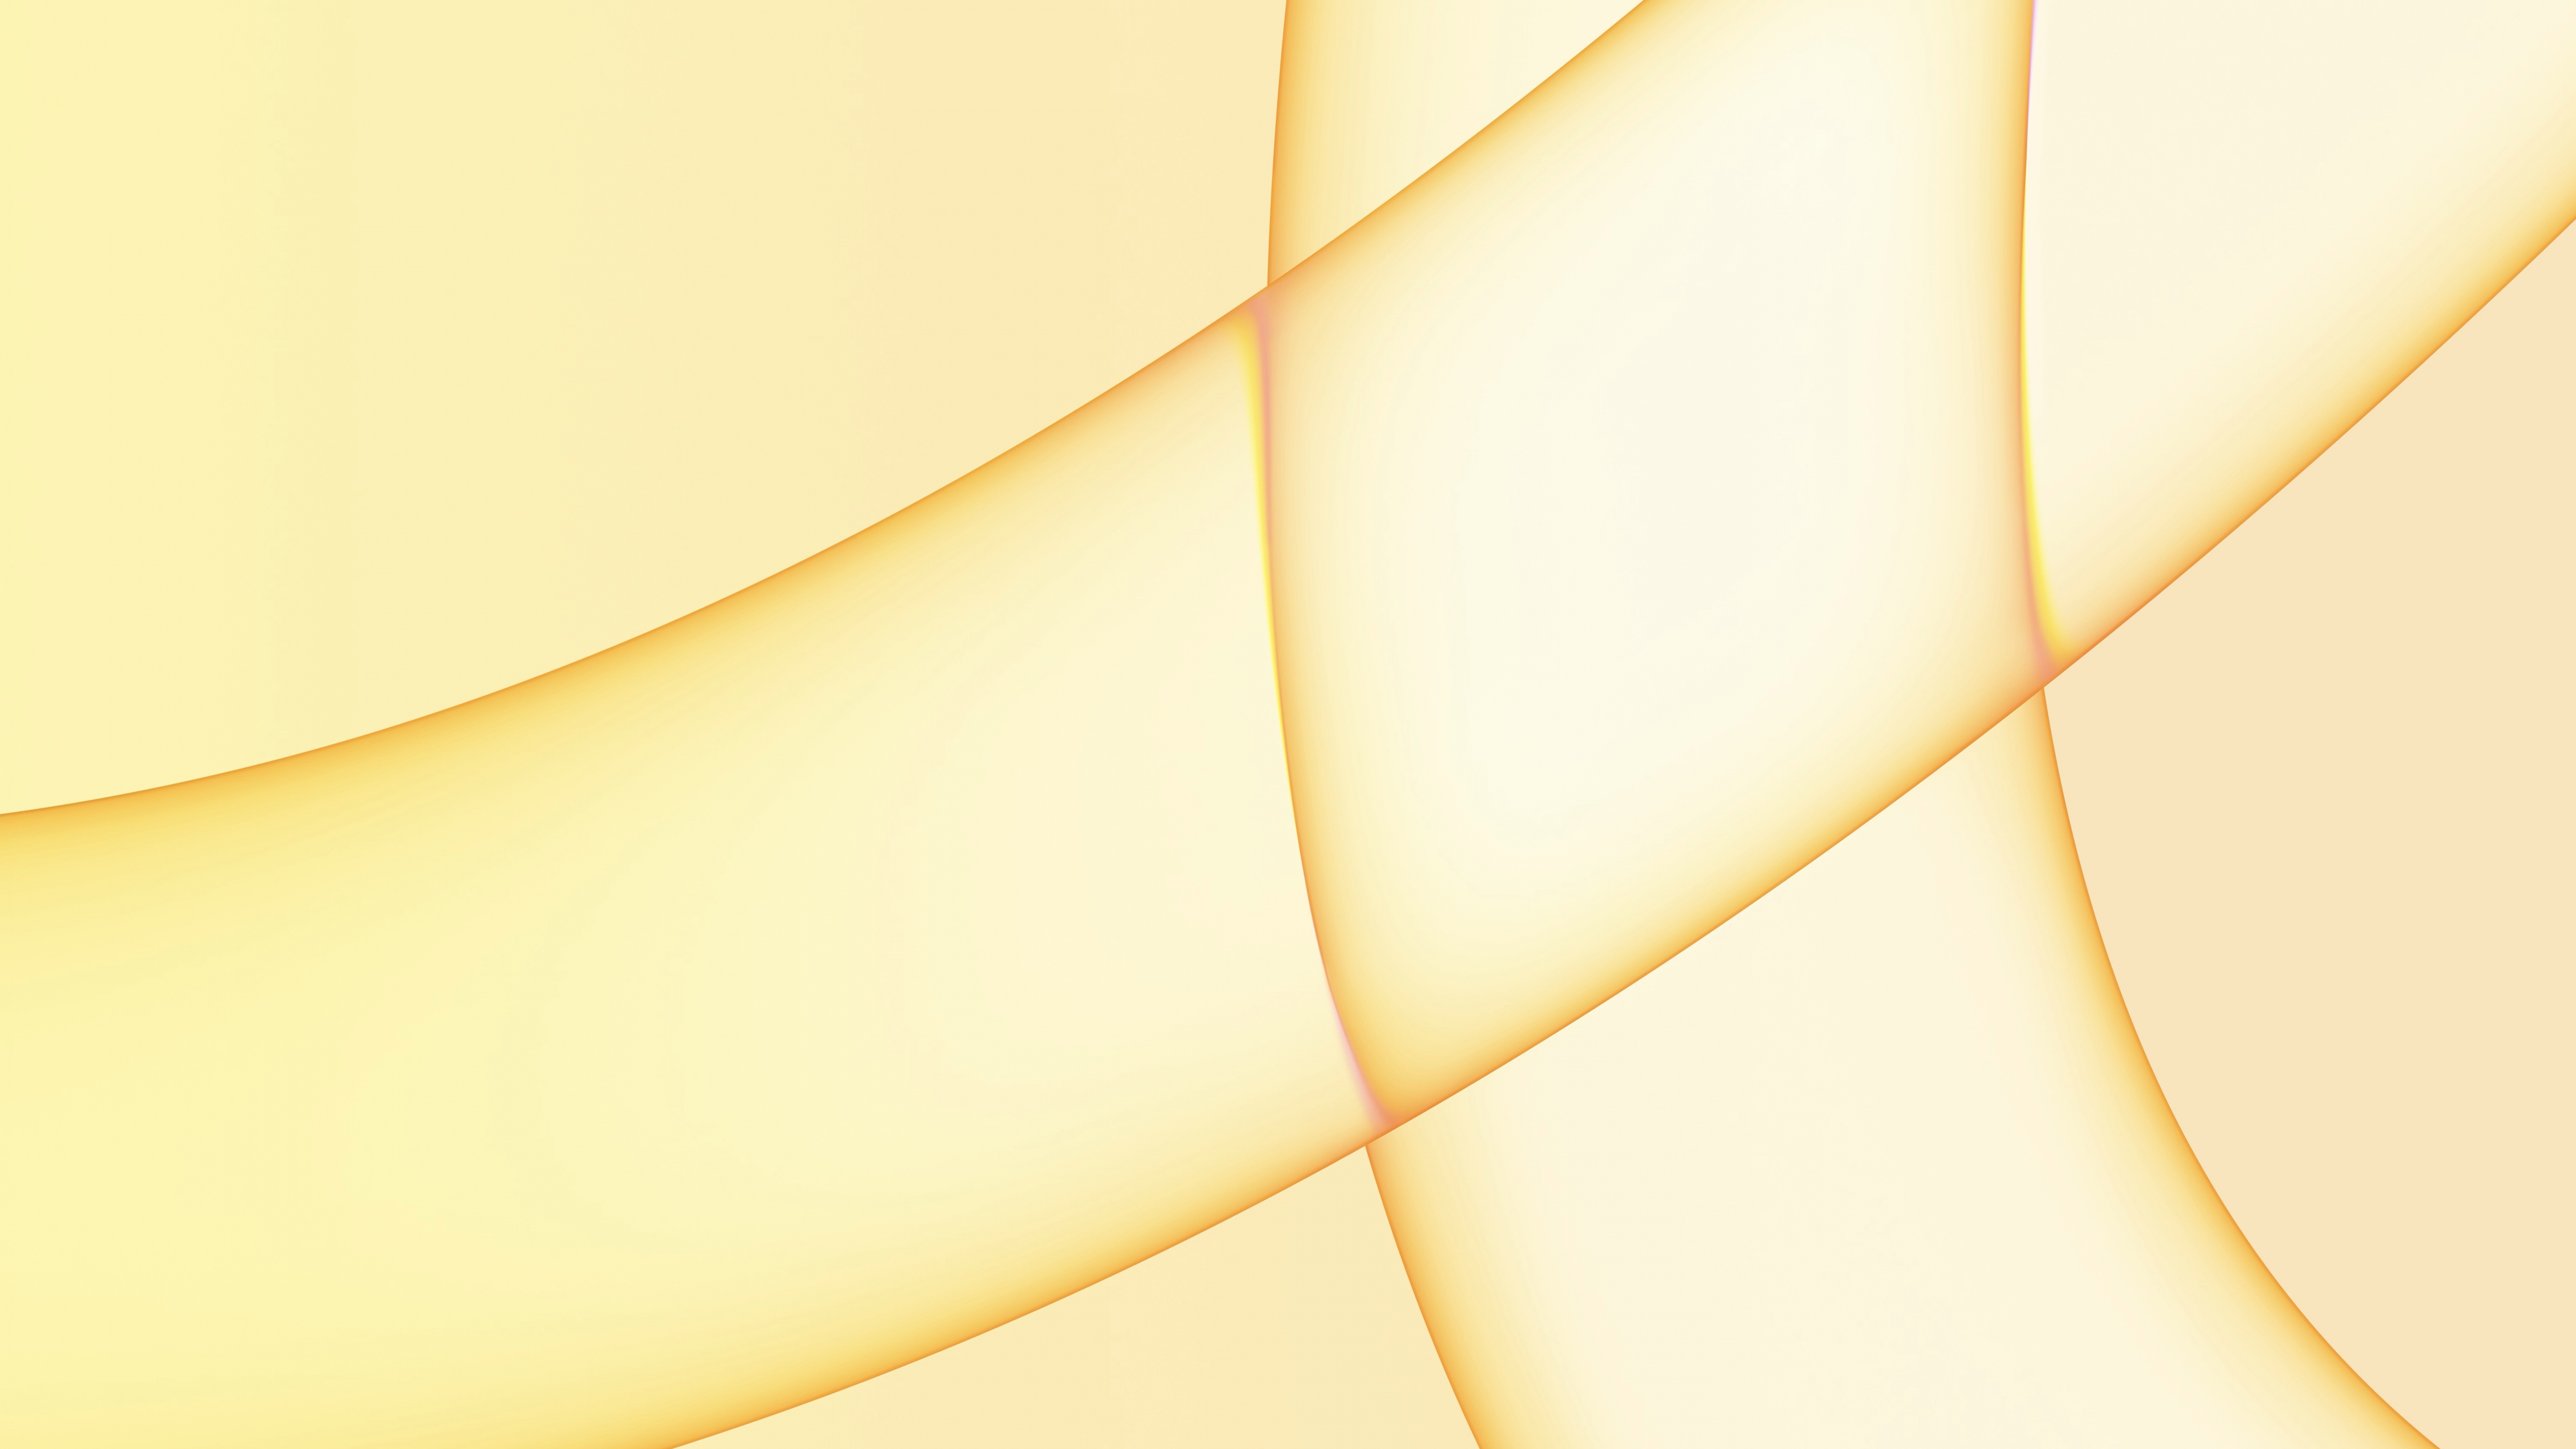 iMac 2021 Wallpaper 4K, Apple Event Stock, Yellow background, 5K, Abstract